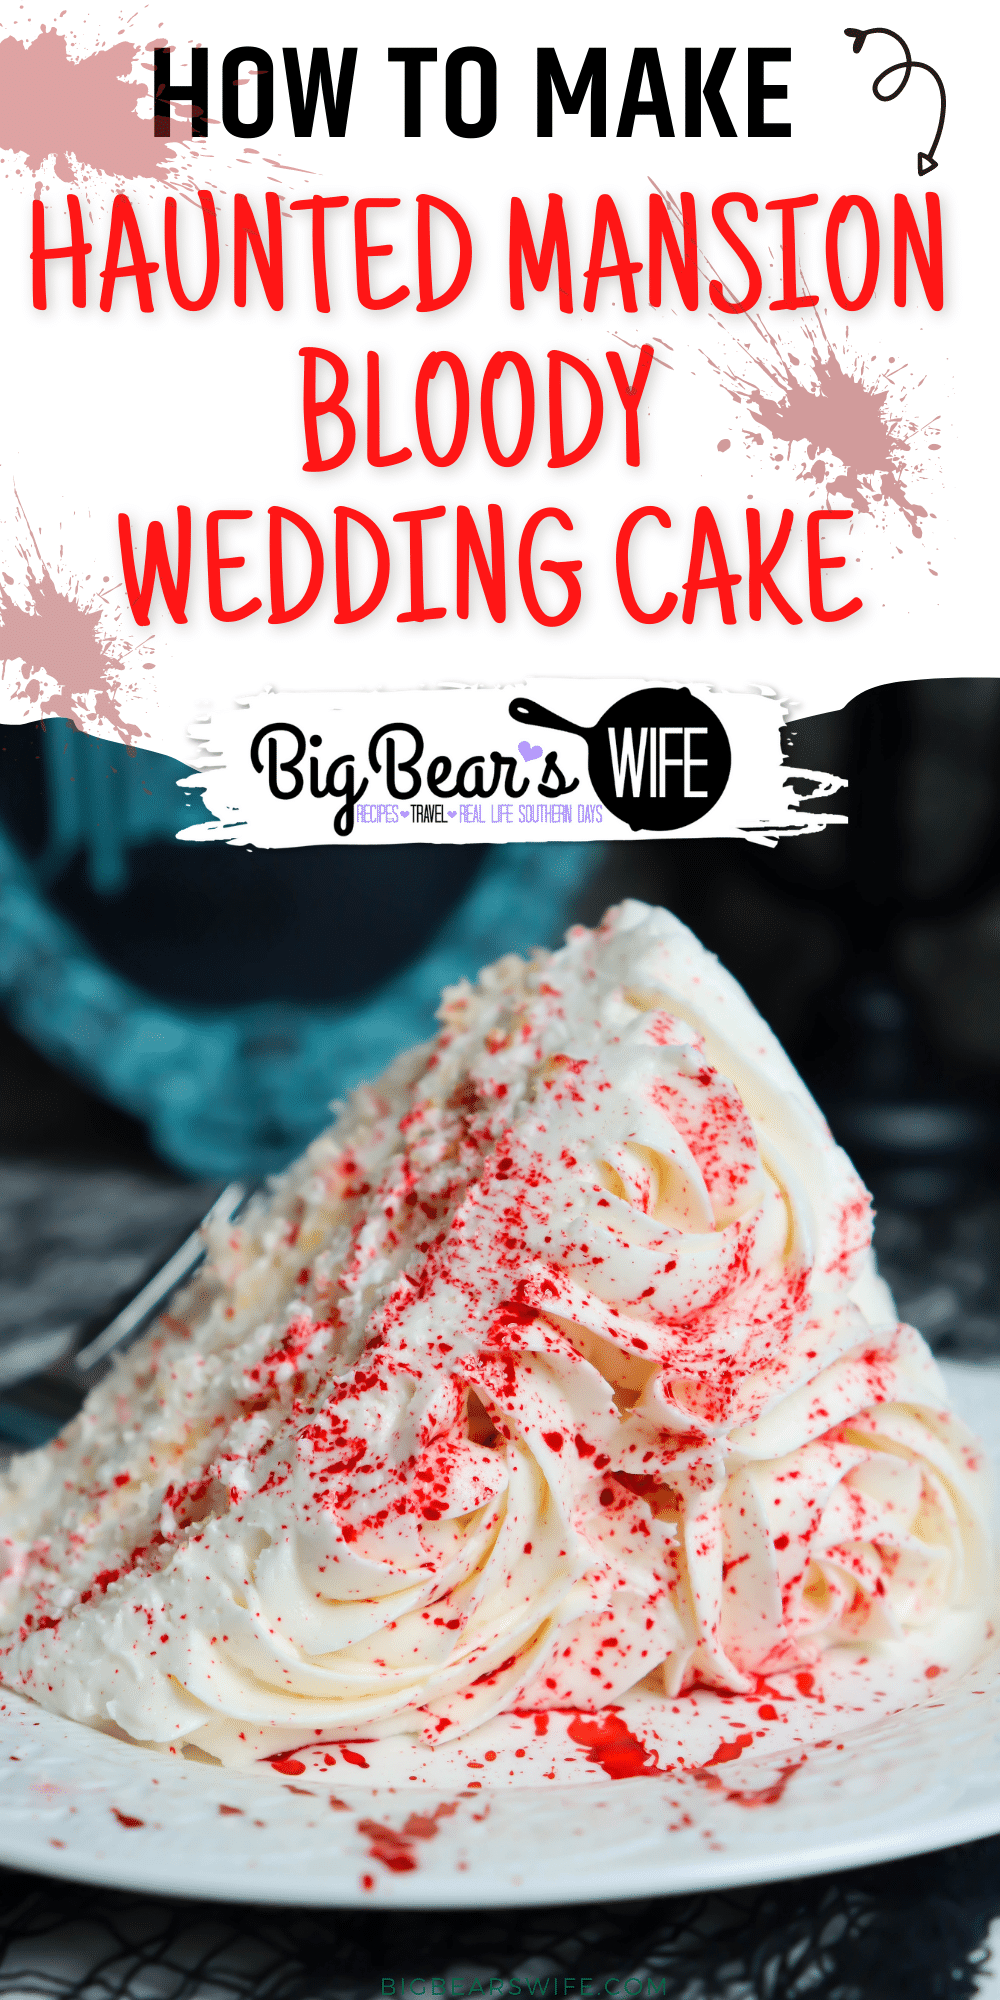 Haunted Mansion Bloody Wedding Cake - This Halloween dessert is inspired by the Haunted Mansion at Disney World and Constance Hatchaway, the ghostly bride there that murdered her husbands!  A white wedding style cake gets a splatter of (red food coloring) blood as the Haunted Mansion bride uses a hatchet to  become a widow once again.   via @bigbearswife